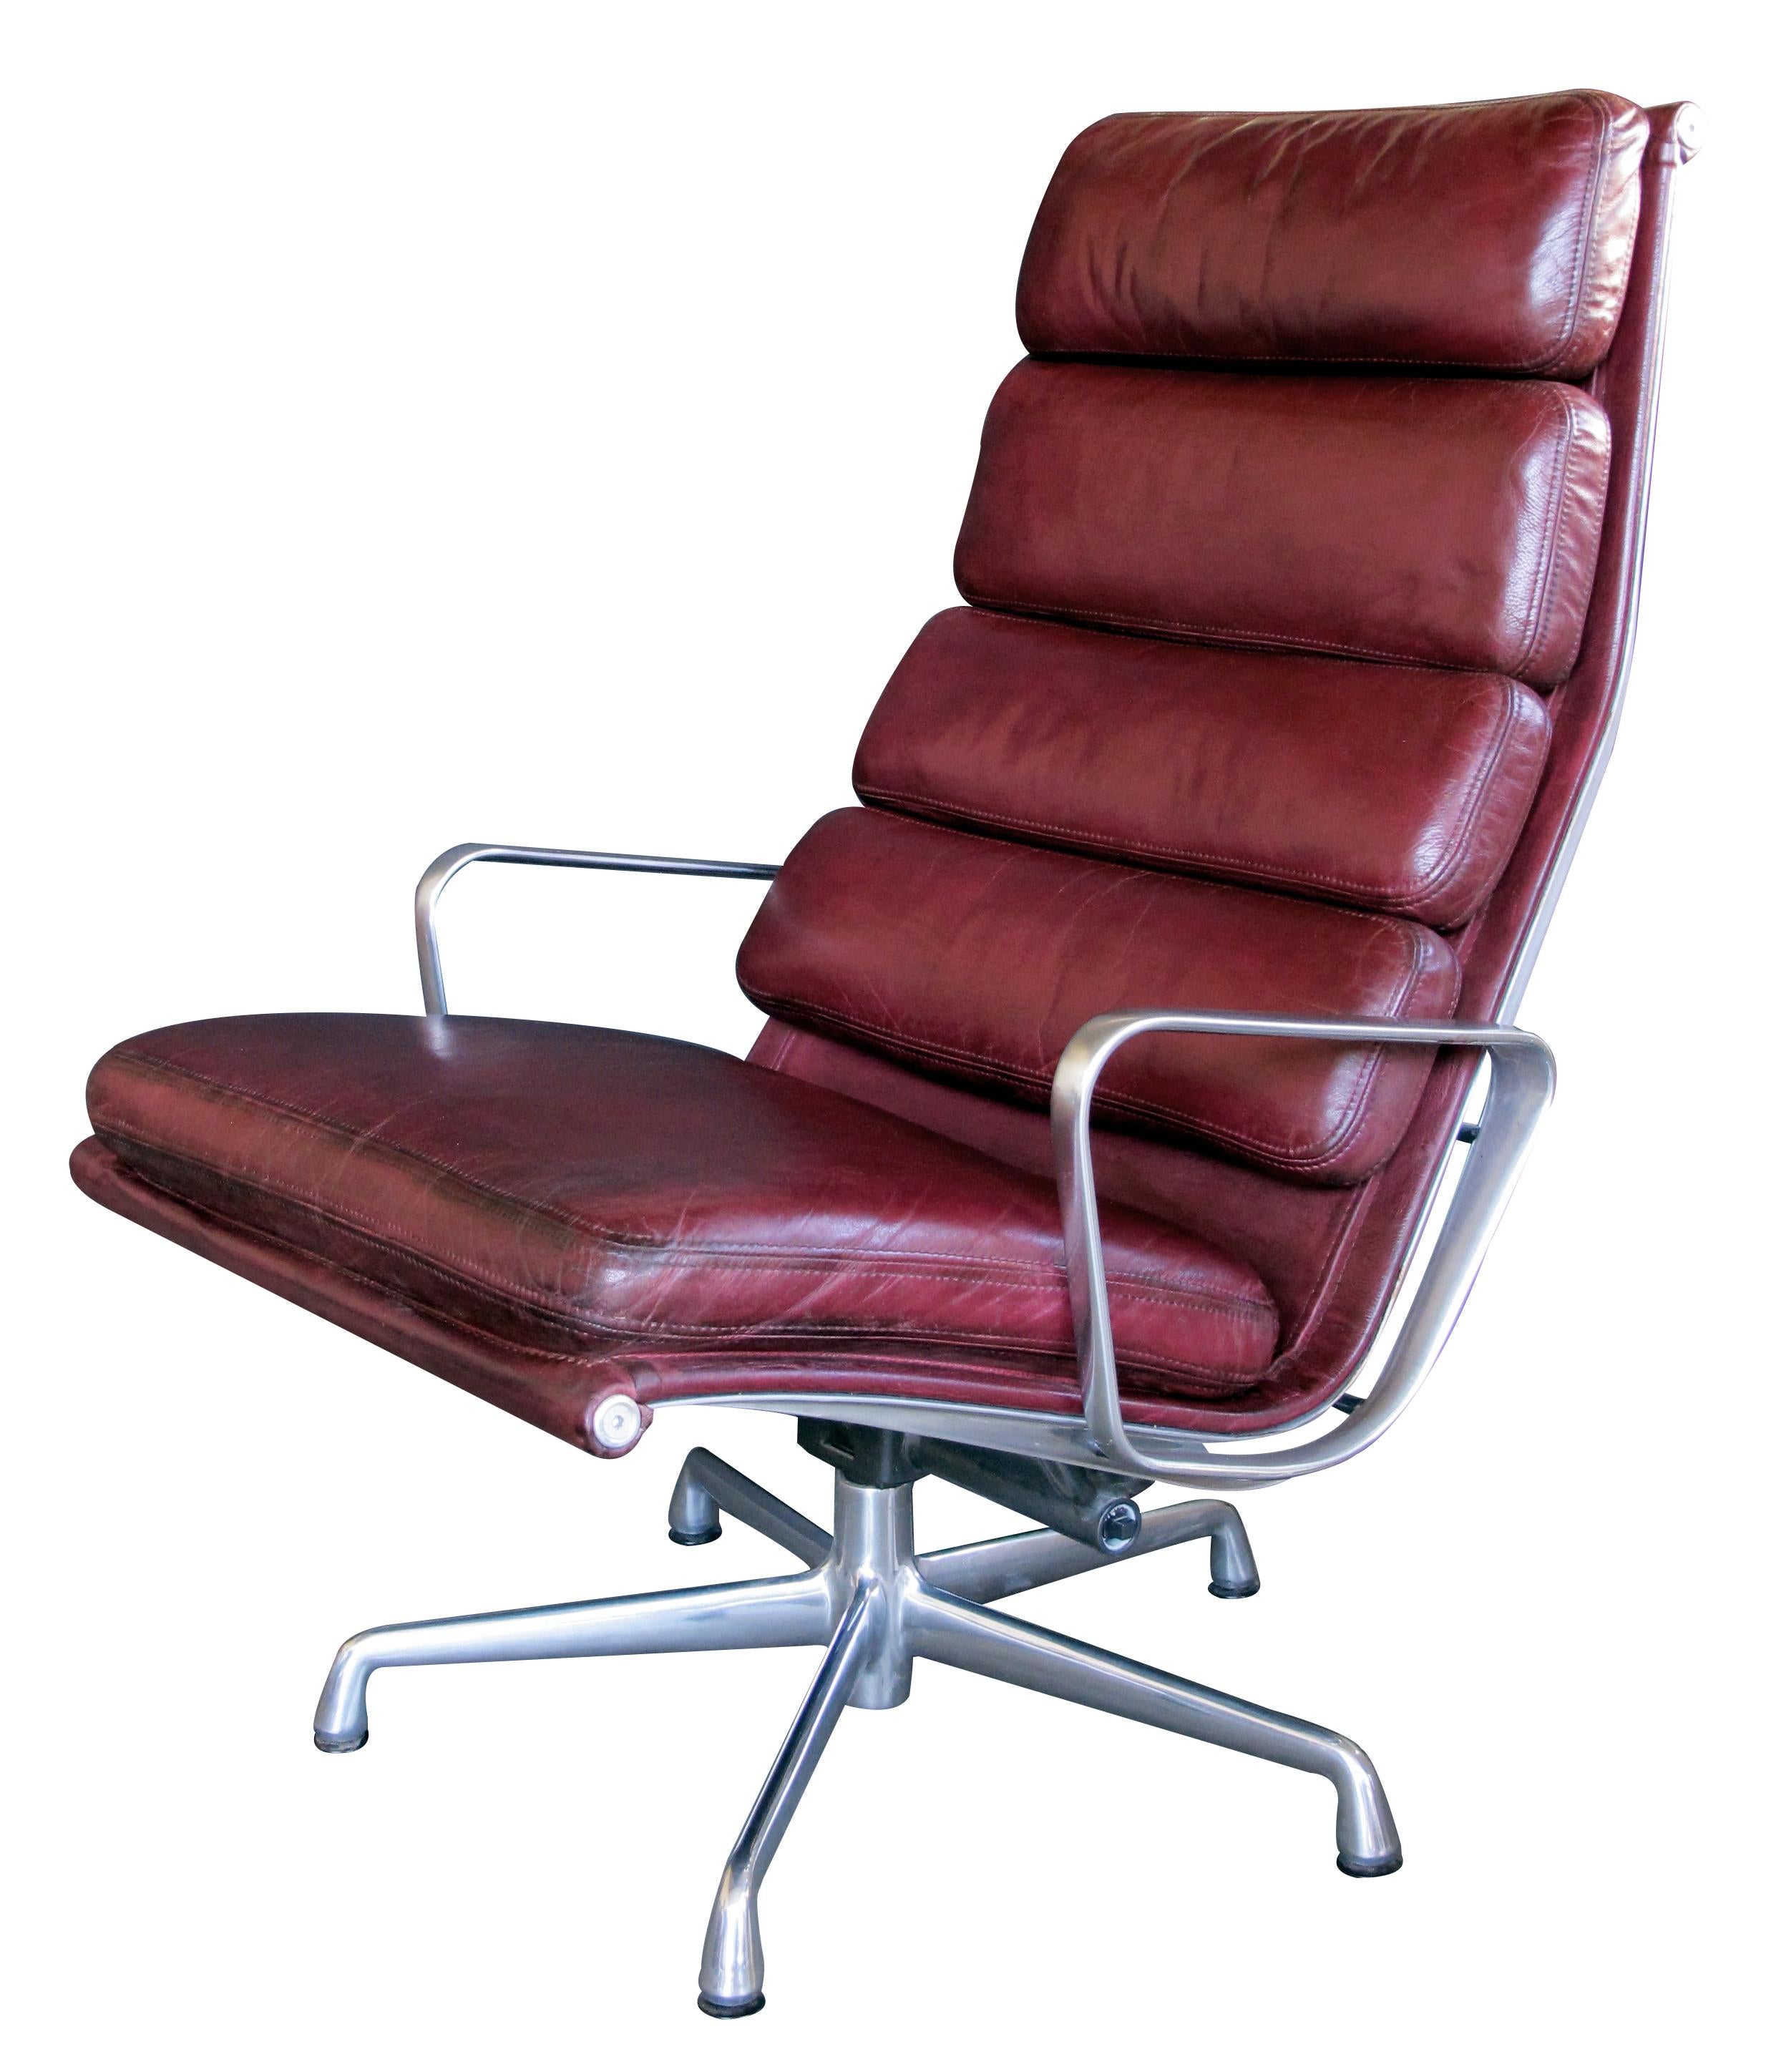 This classic design of aluminum construction with burgundy leather; original design from 1958, Eames Aluminum Group; 1980's; see '1000 chairs' by Charlotte and Peter Fiell pgs. 338-339; overall creasing and patina to leather; ottoman height 19.5